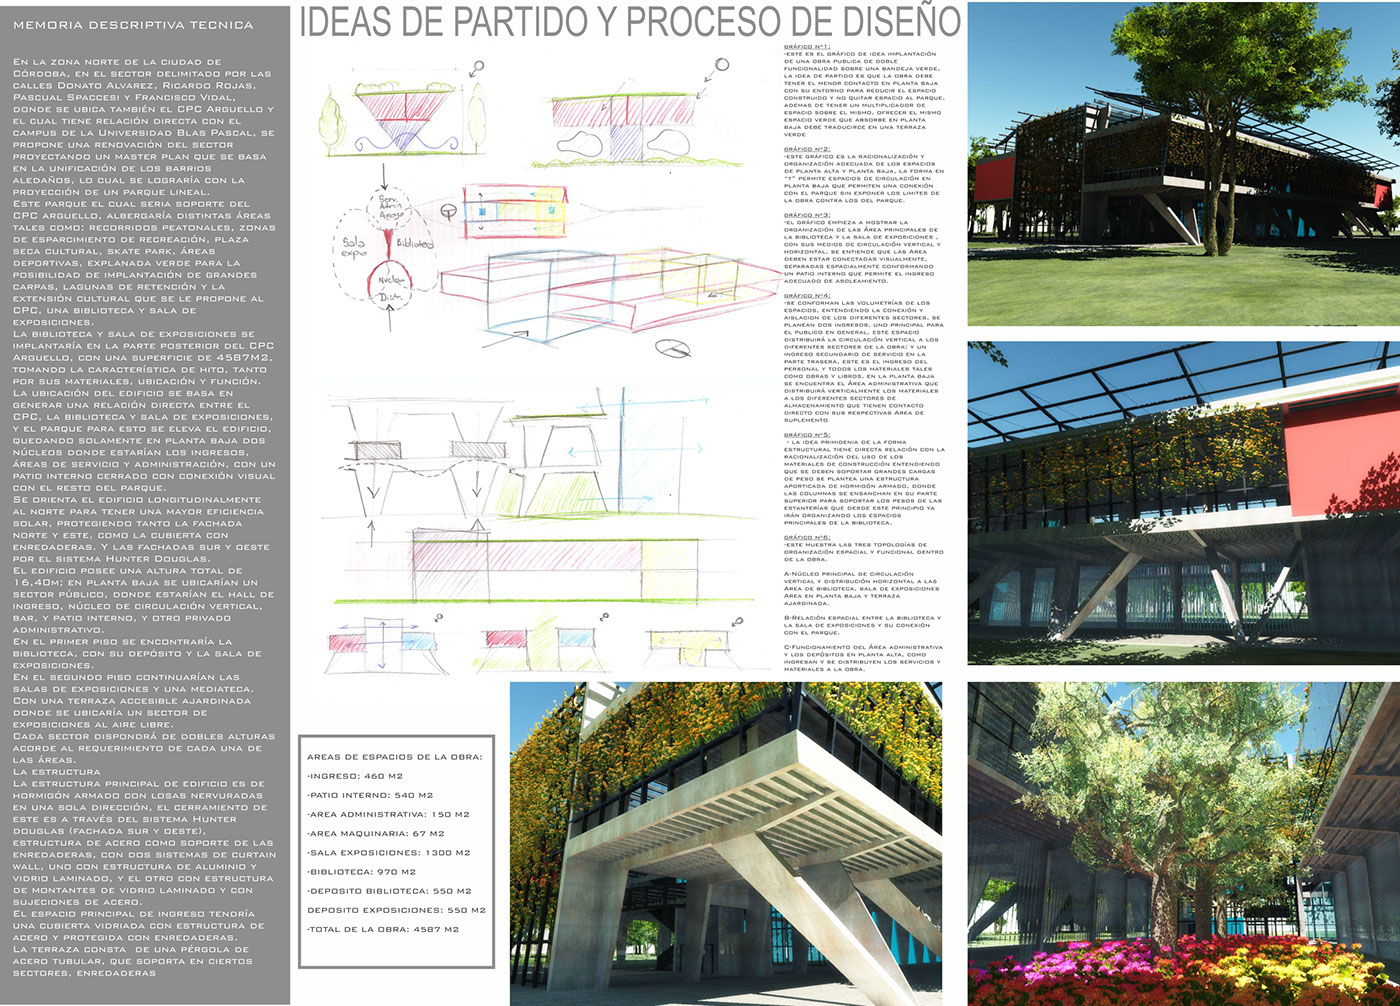 parks library constructions green areas grass architecture design